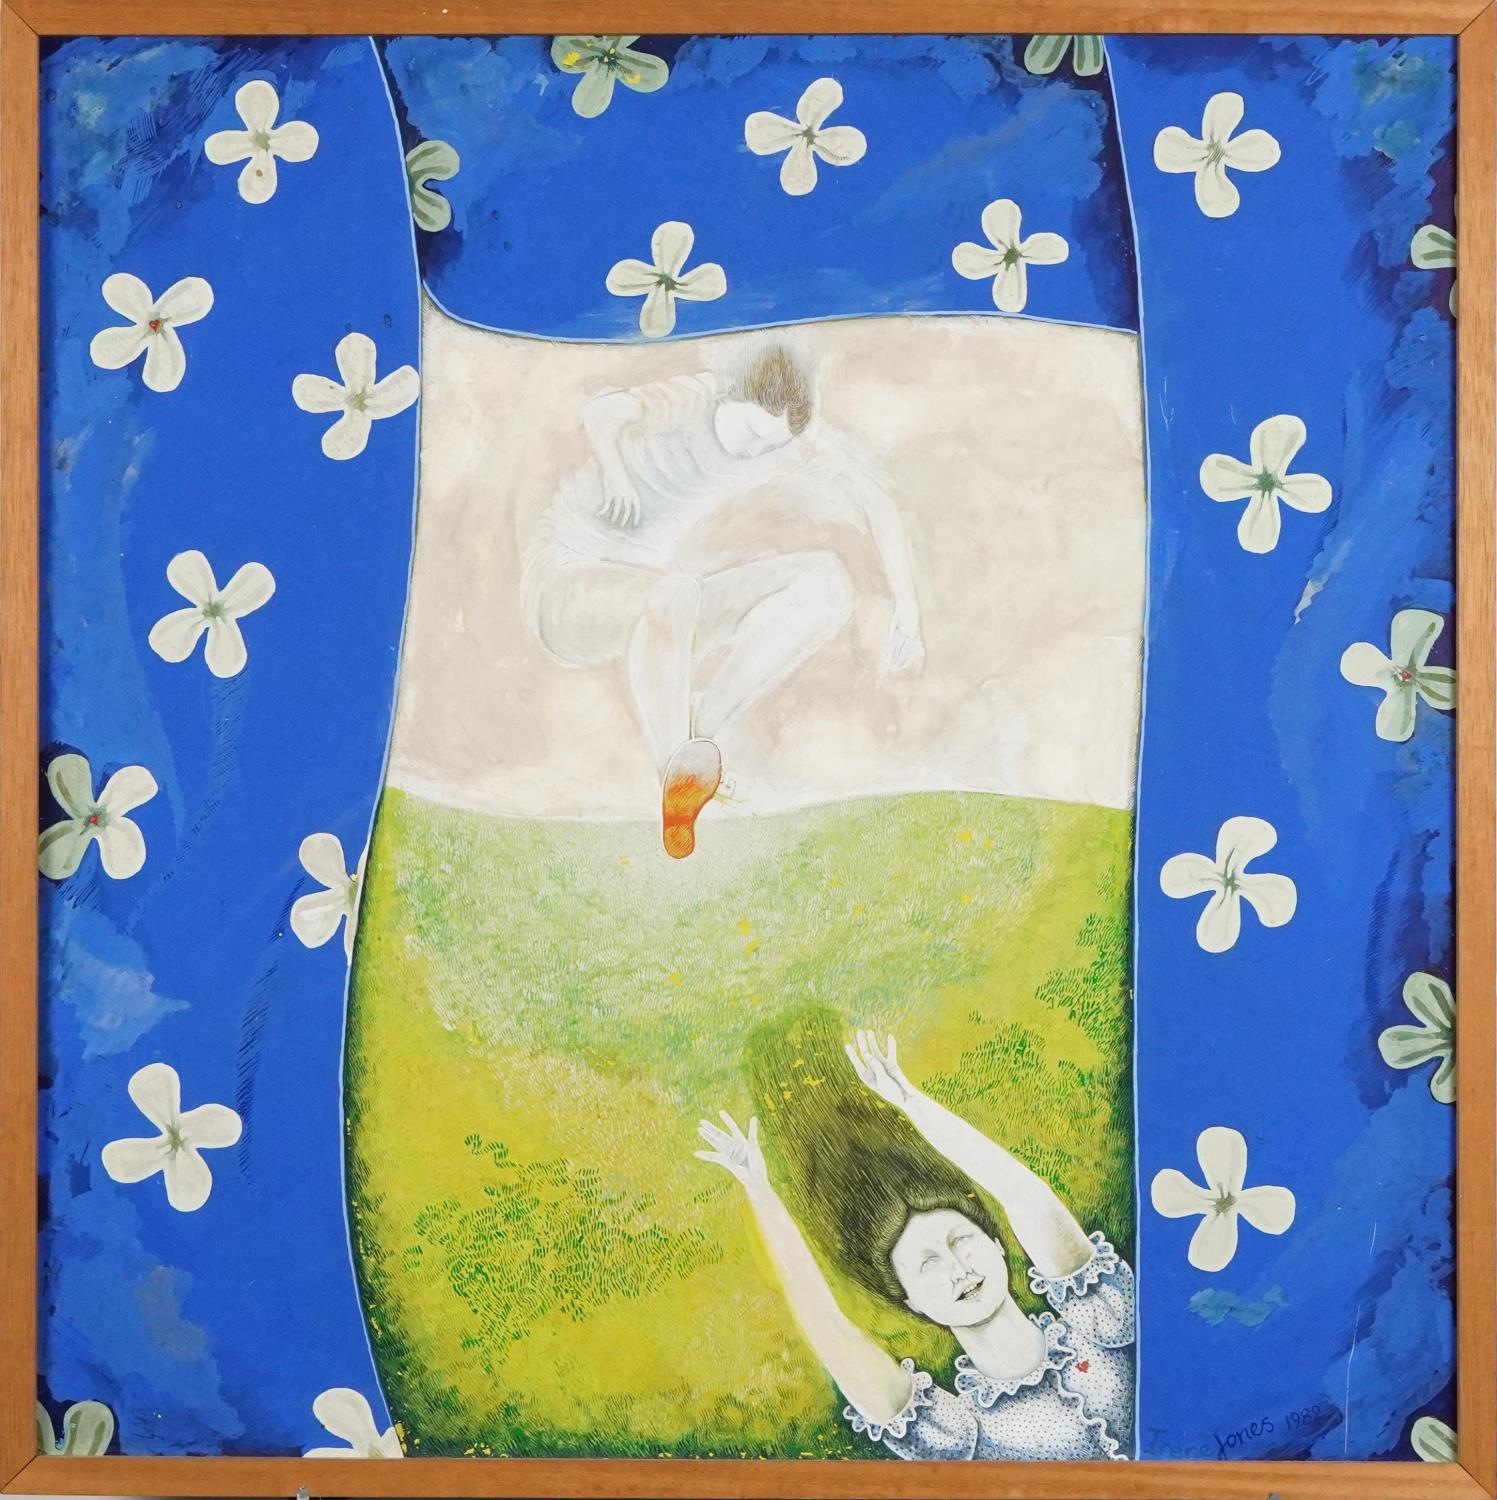 Irene Jones 1982 - Leaping and blue curtains, Cornish school mixed media on board, framed, 60cm x - Image 2 of 4